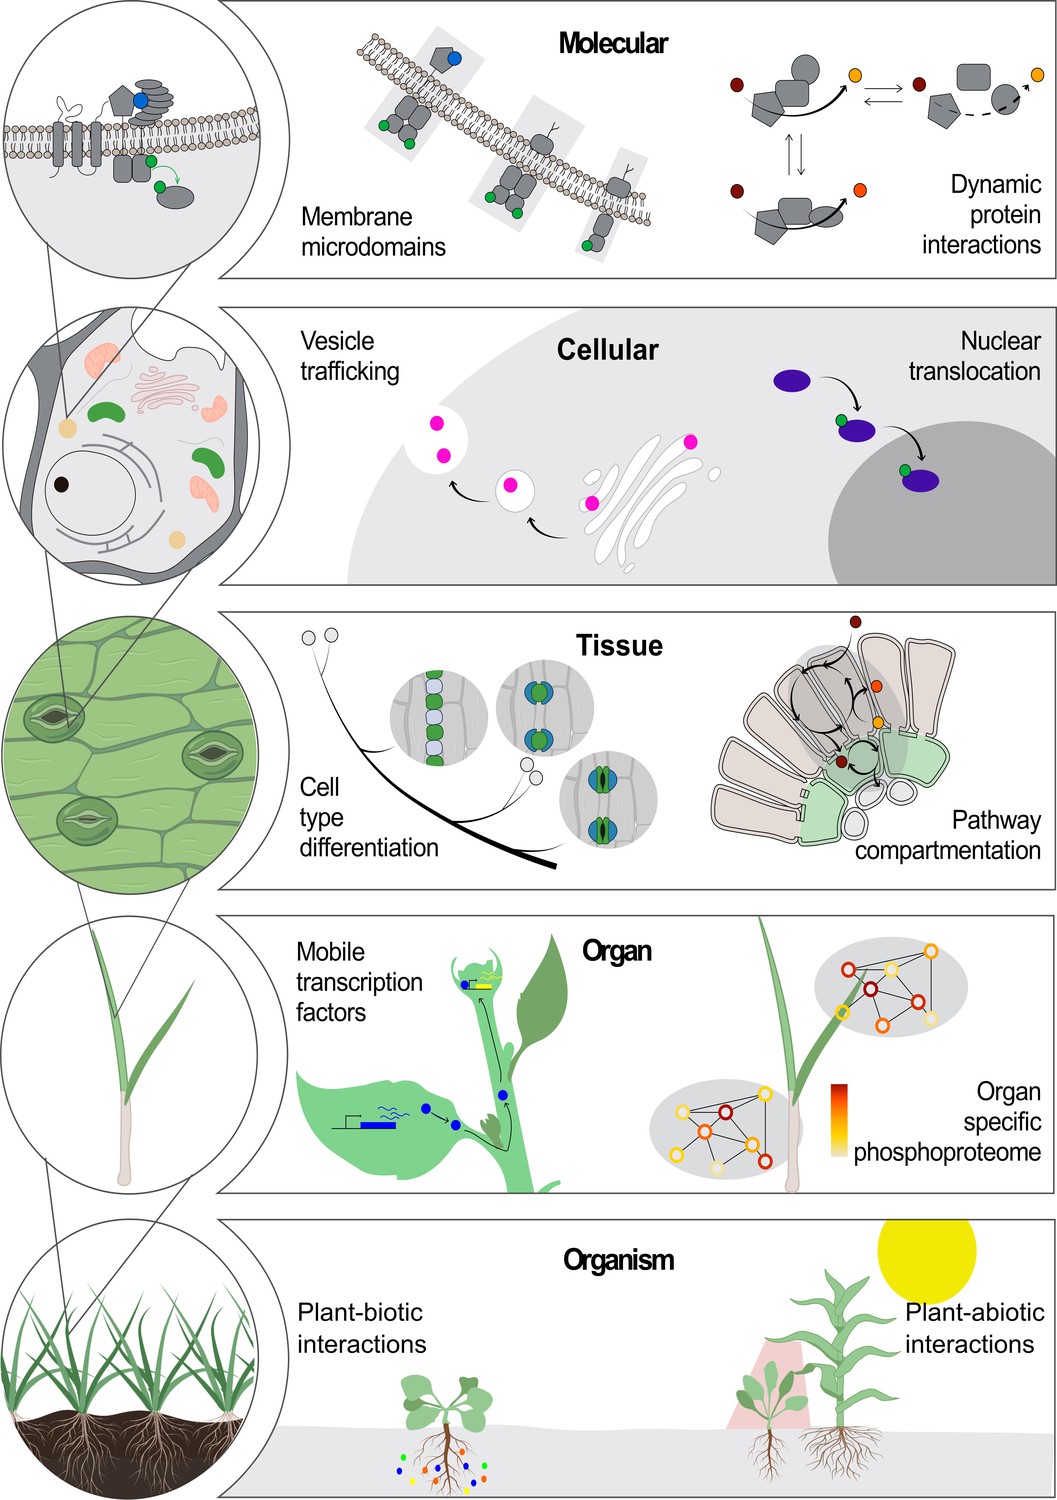 Science Forum: Vision, challenges and opportunities for a Plant Cell Atlas  | eLife